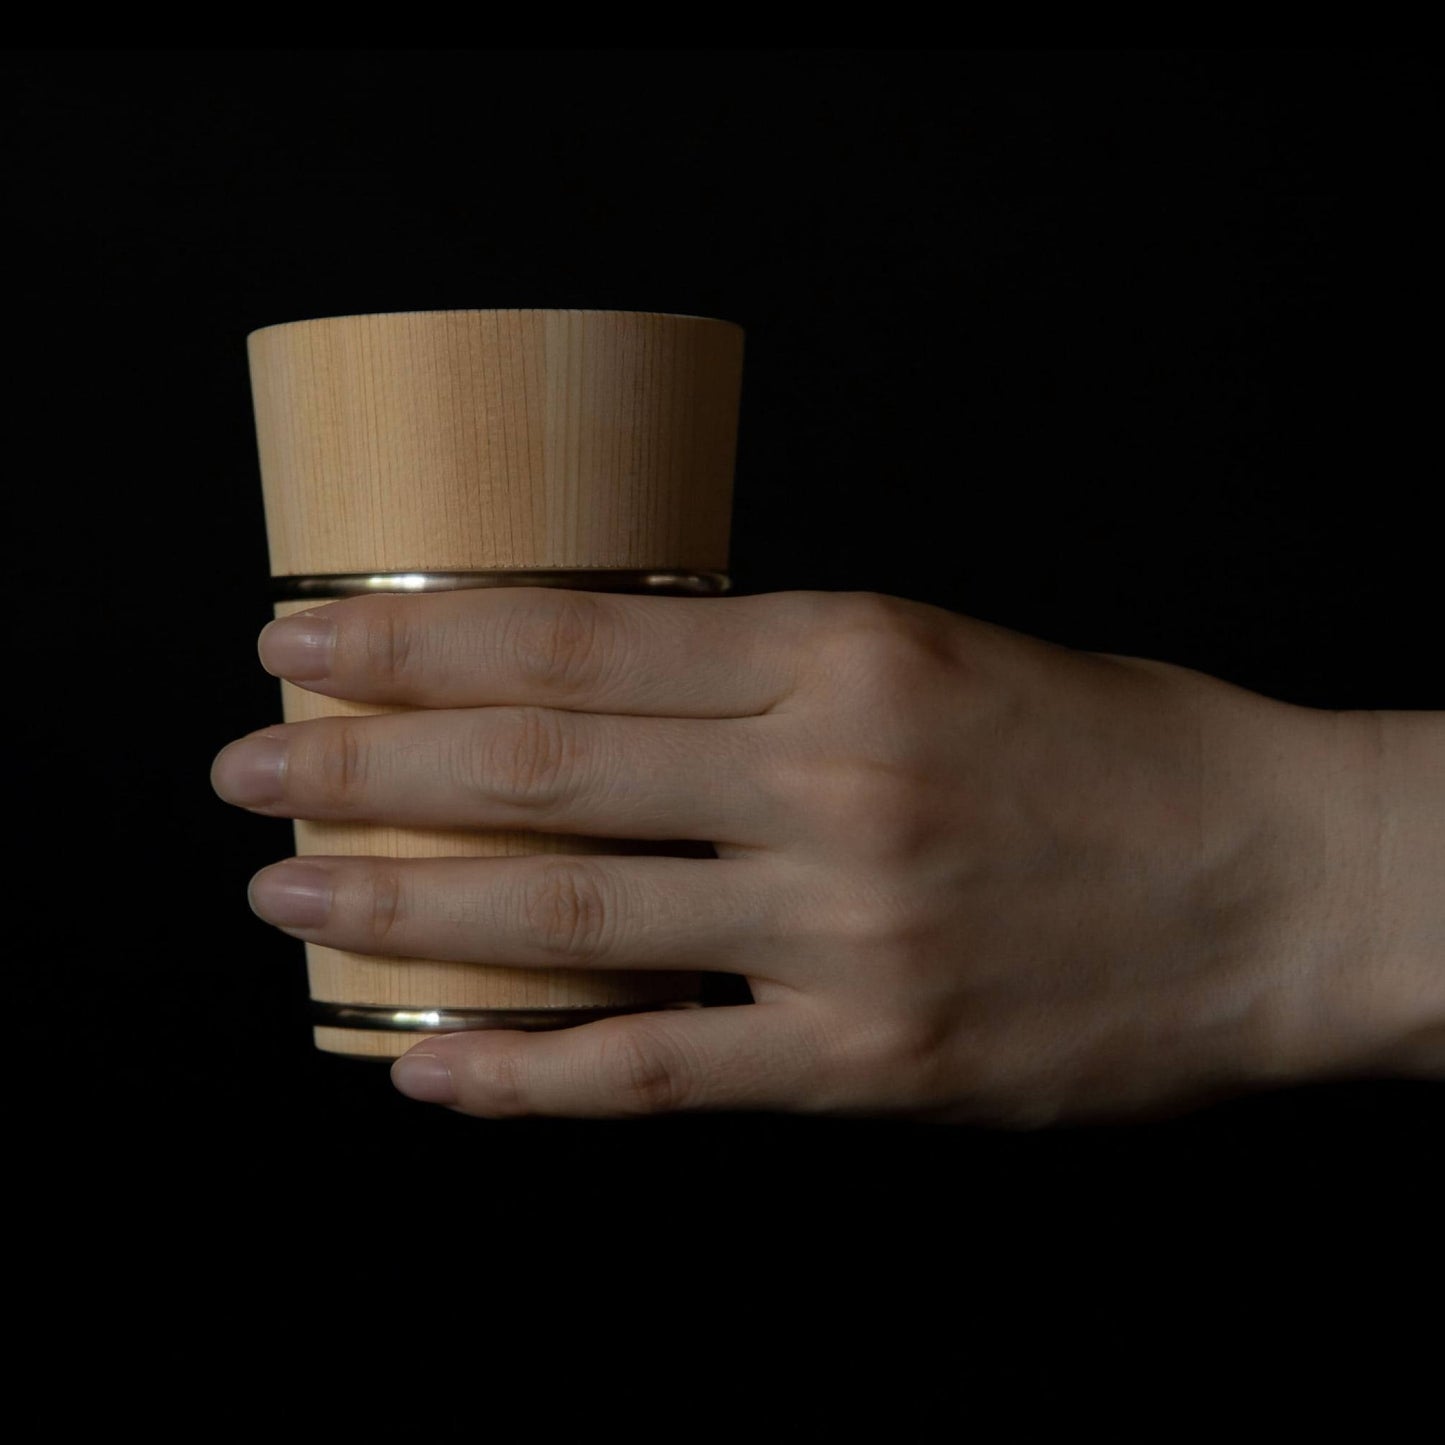 Hand holding wooden Hinoki cup with metal bands